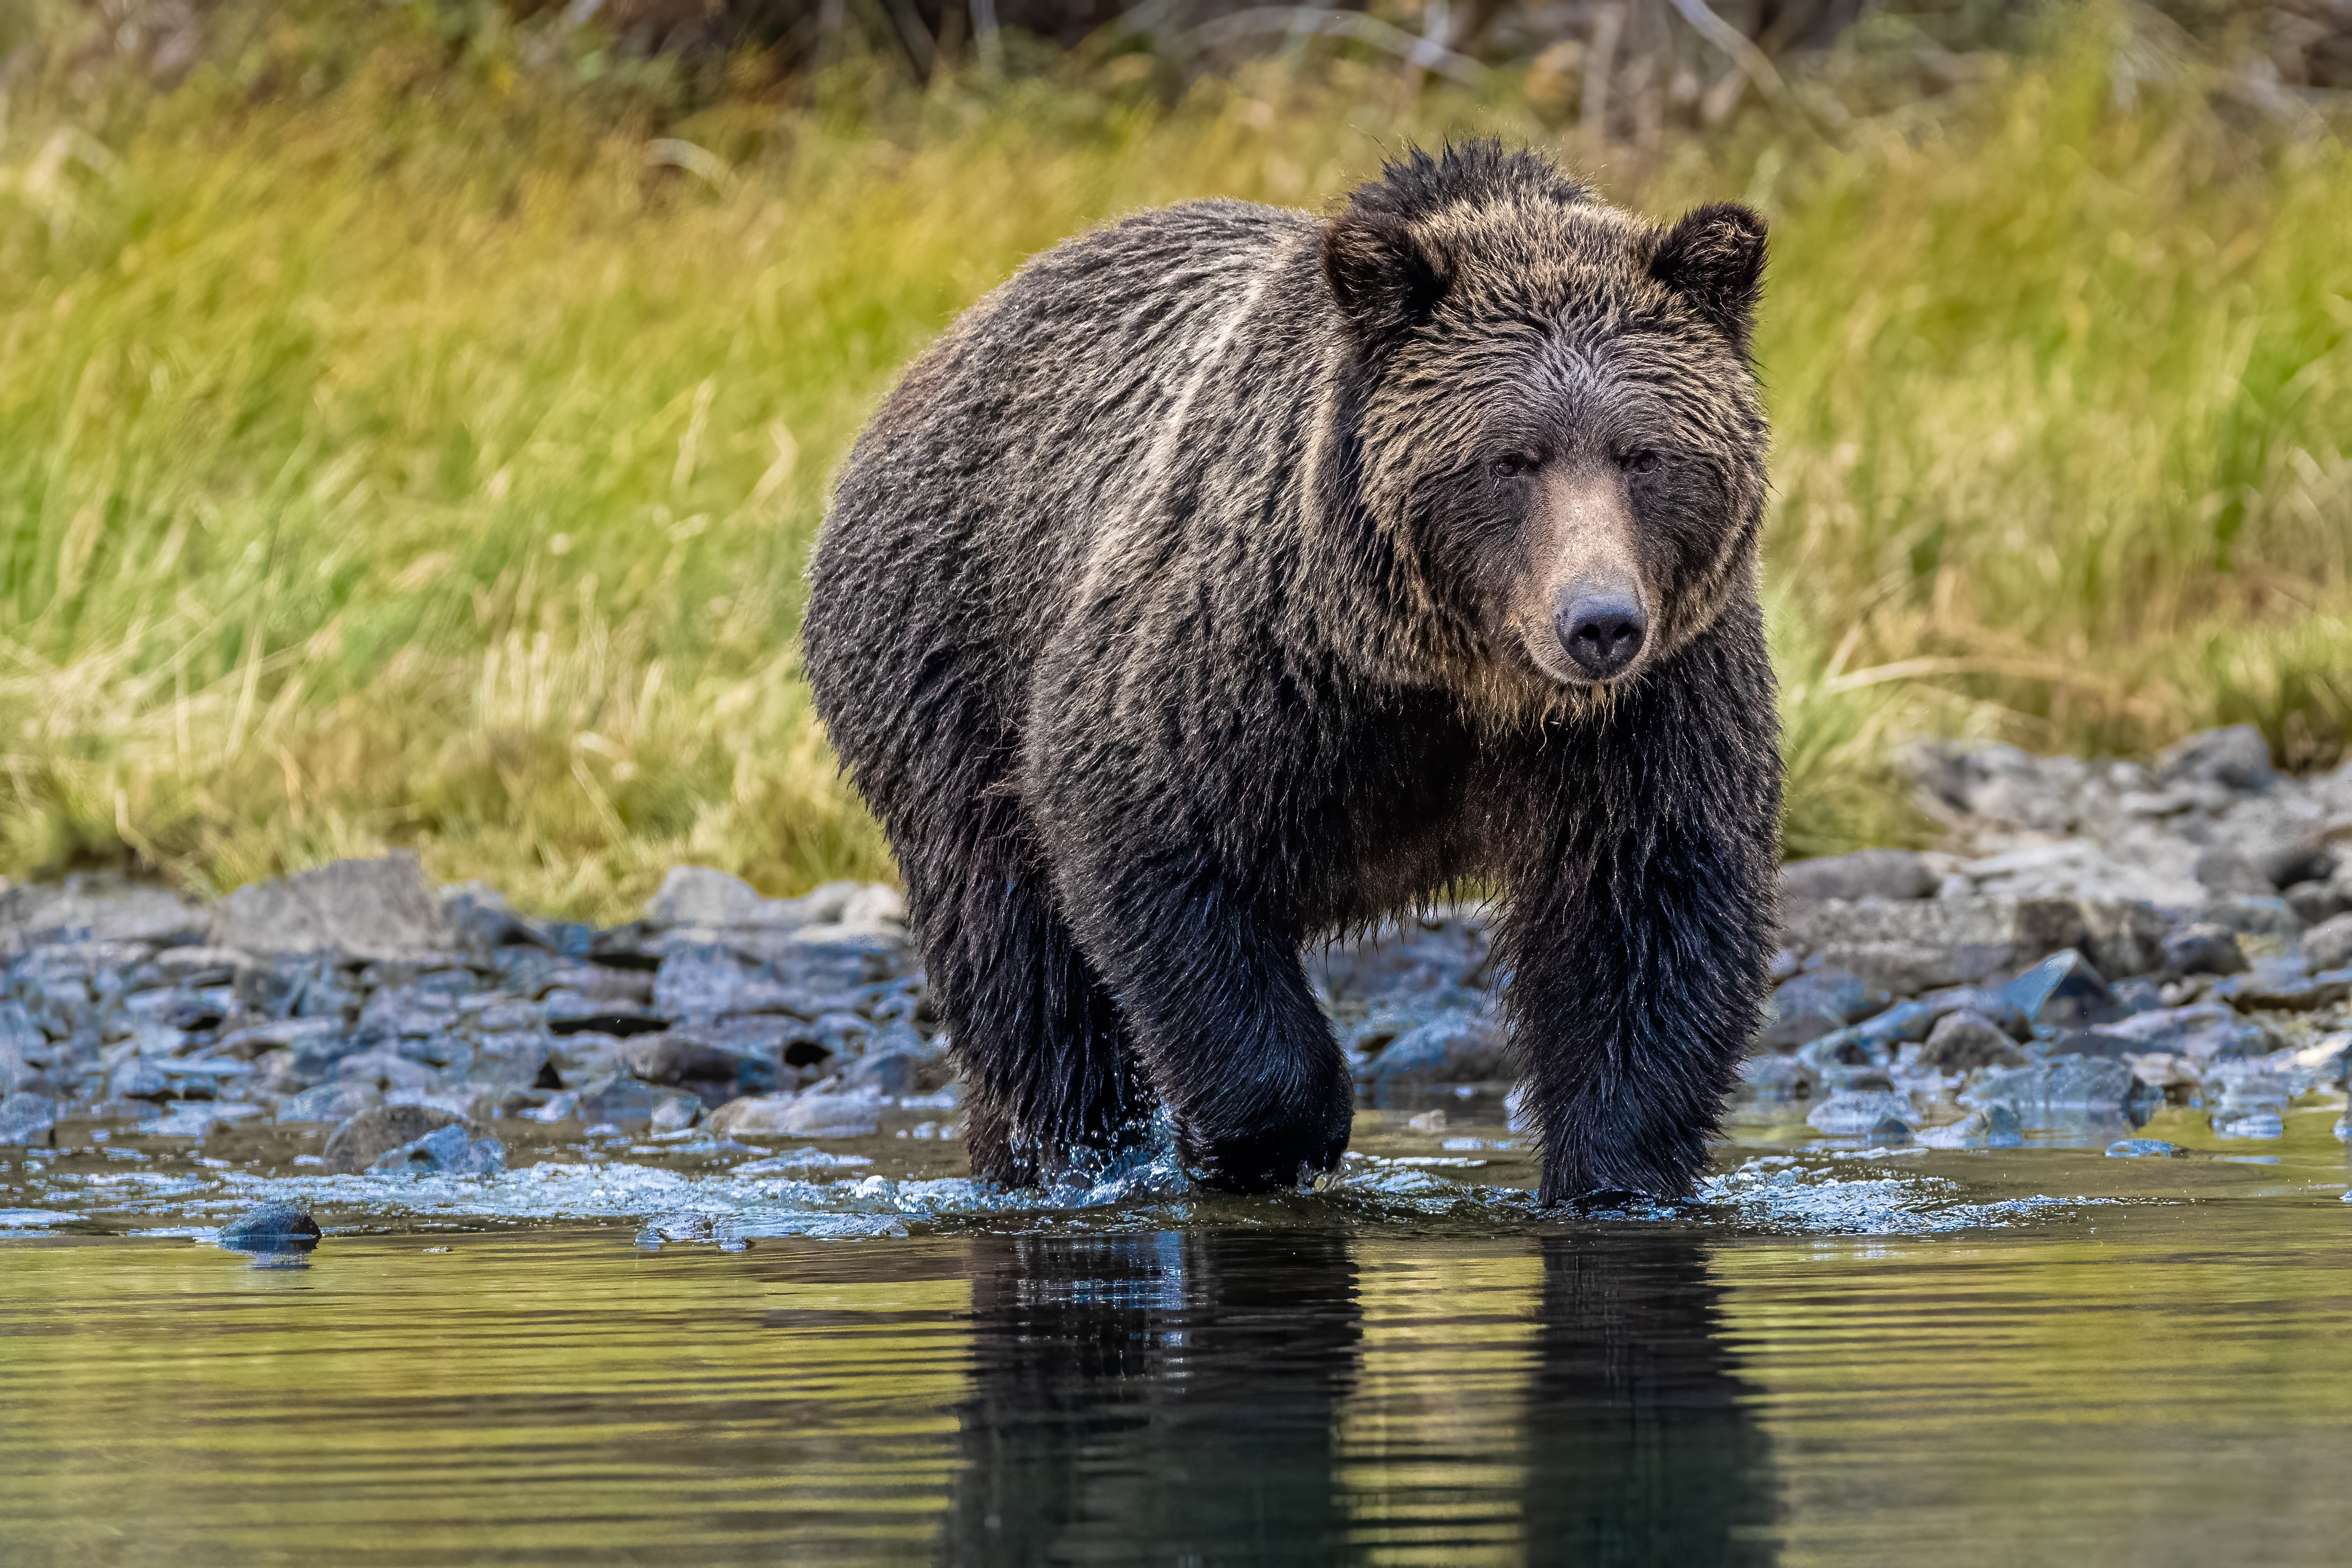 Grizzly bear in Alberta Canada